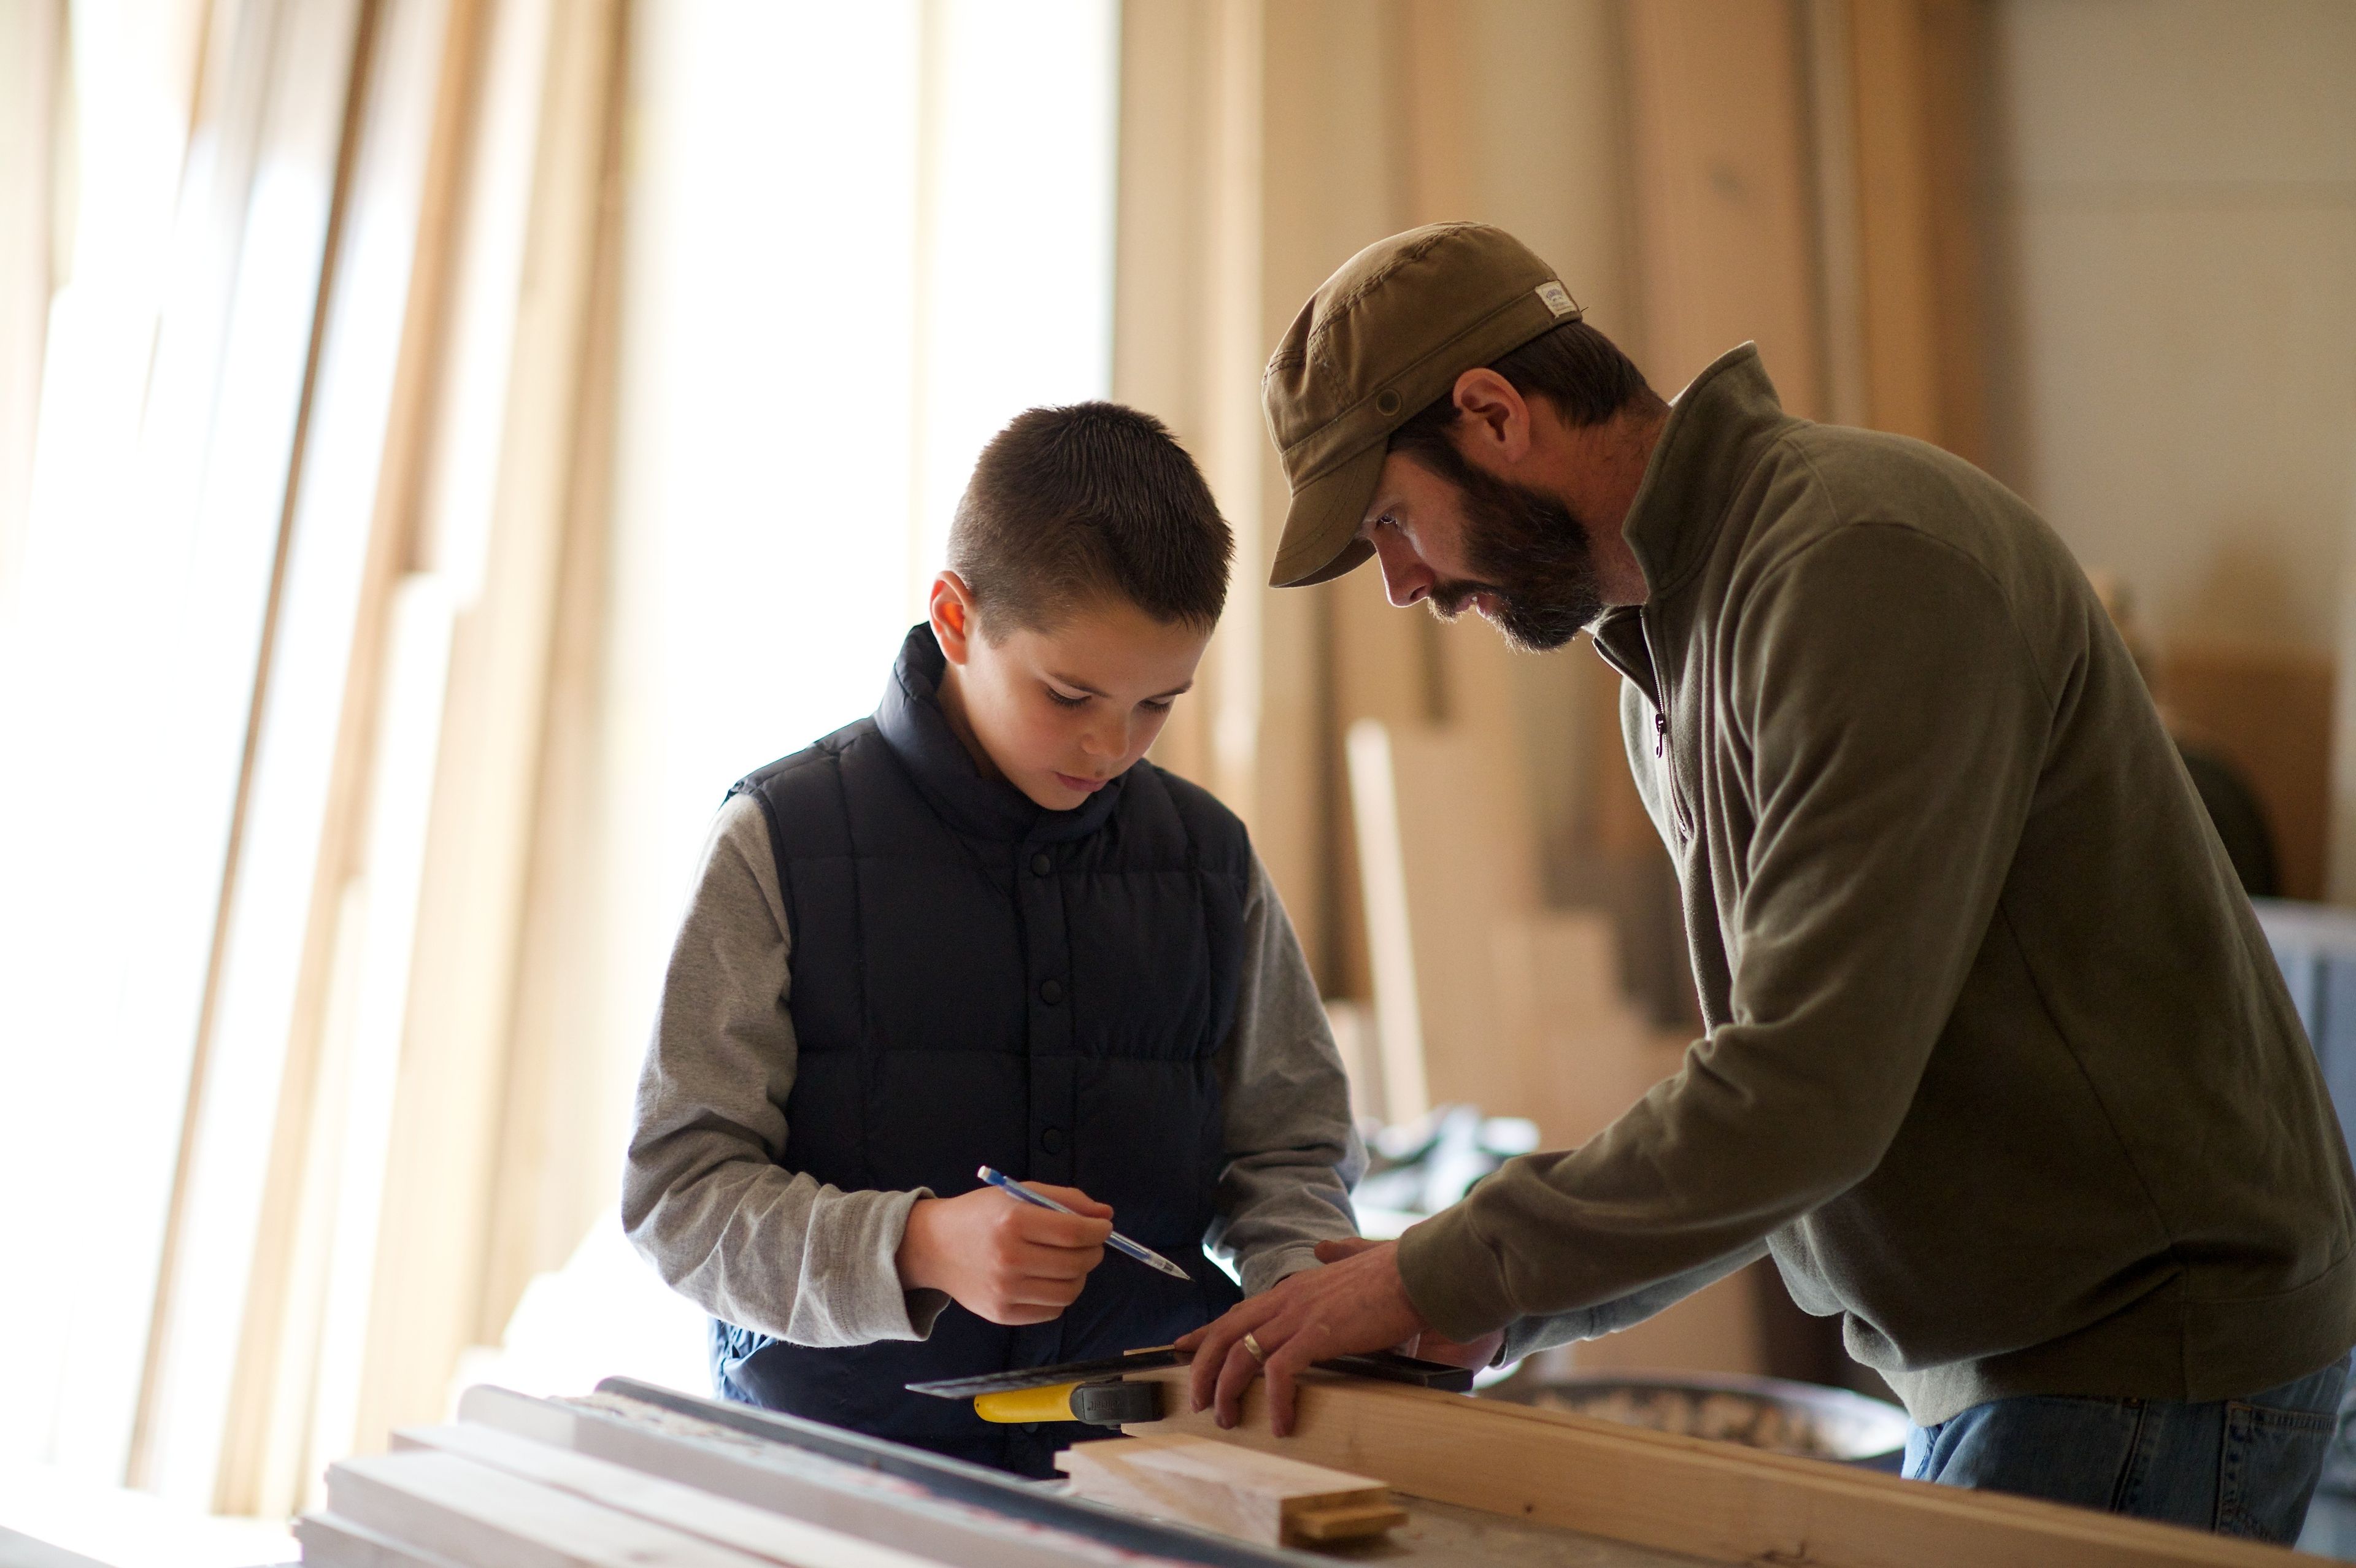 A father shows his son how to do some woodworking.